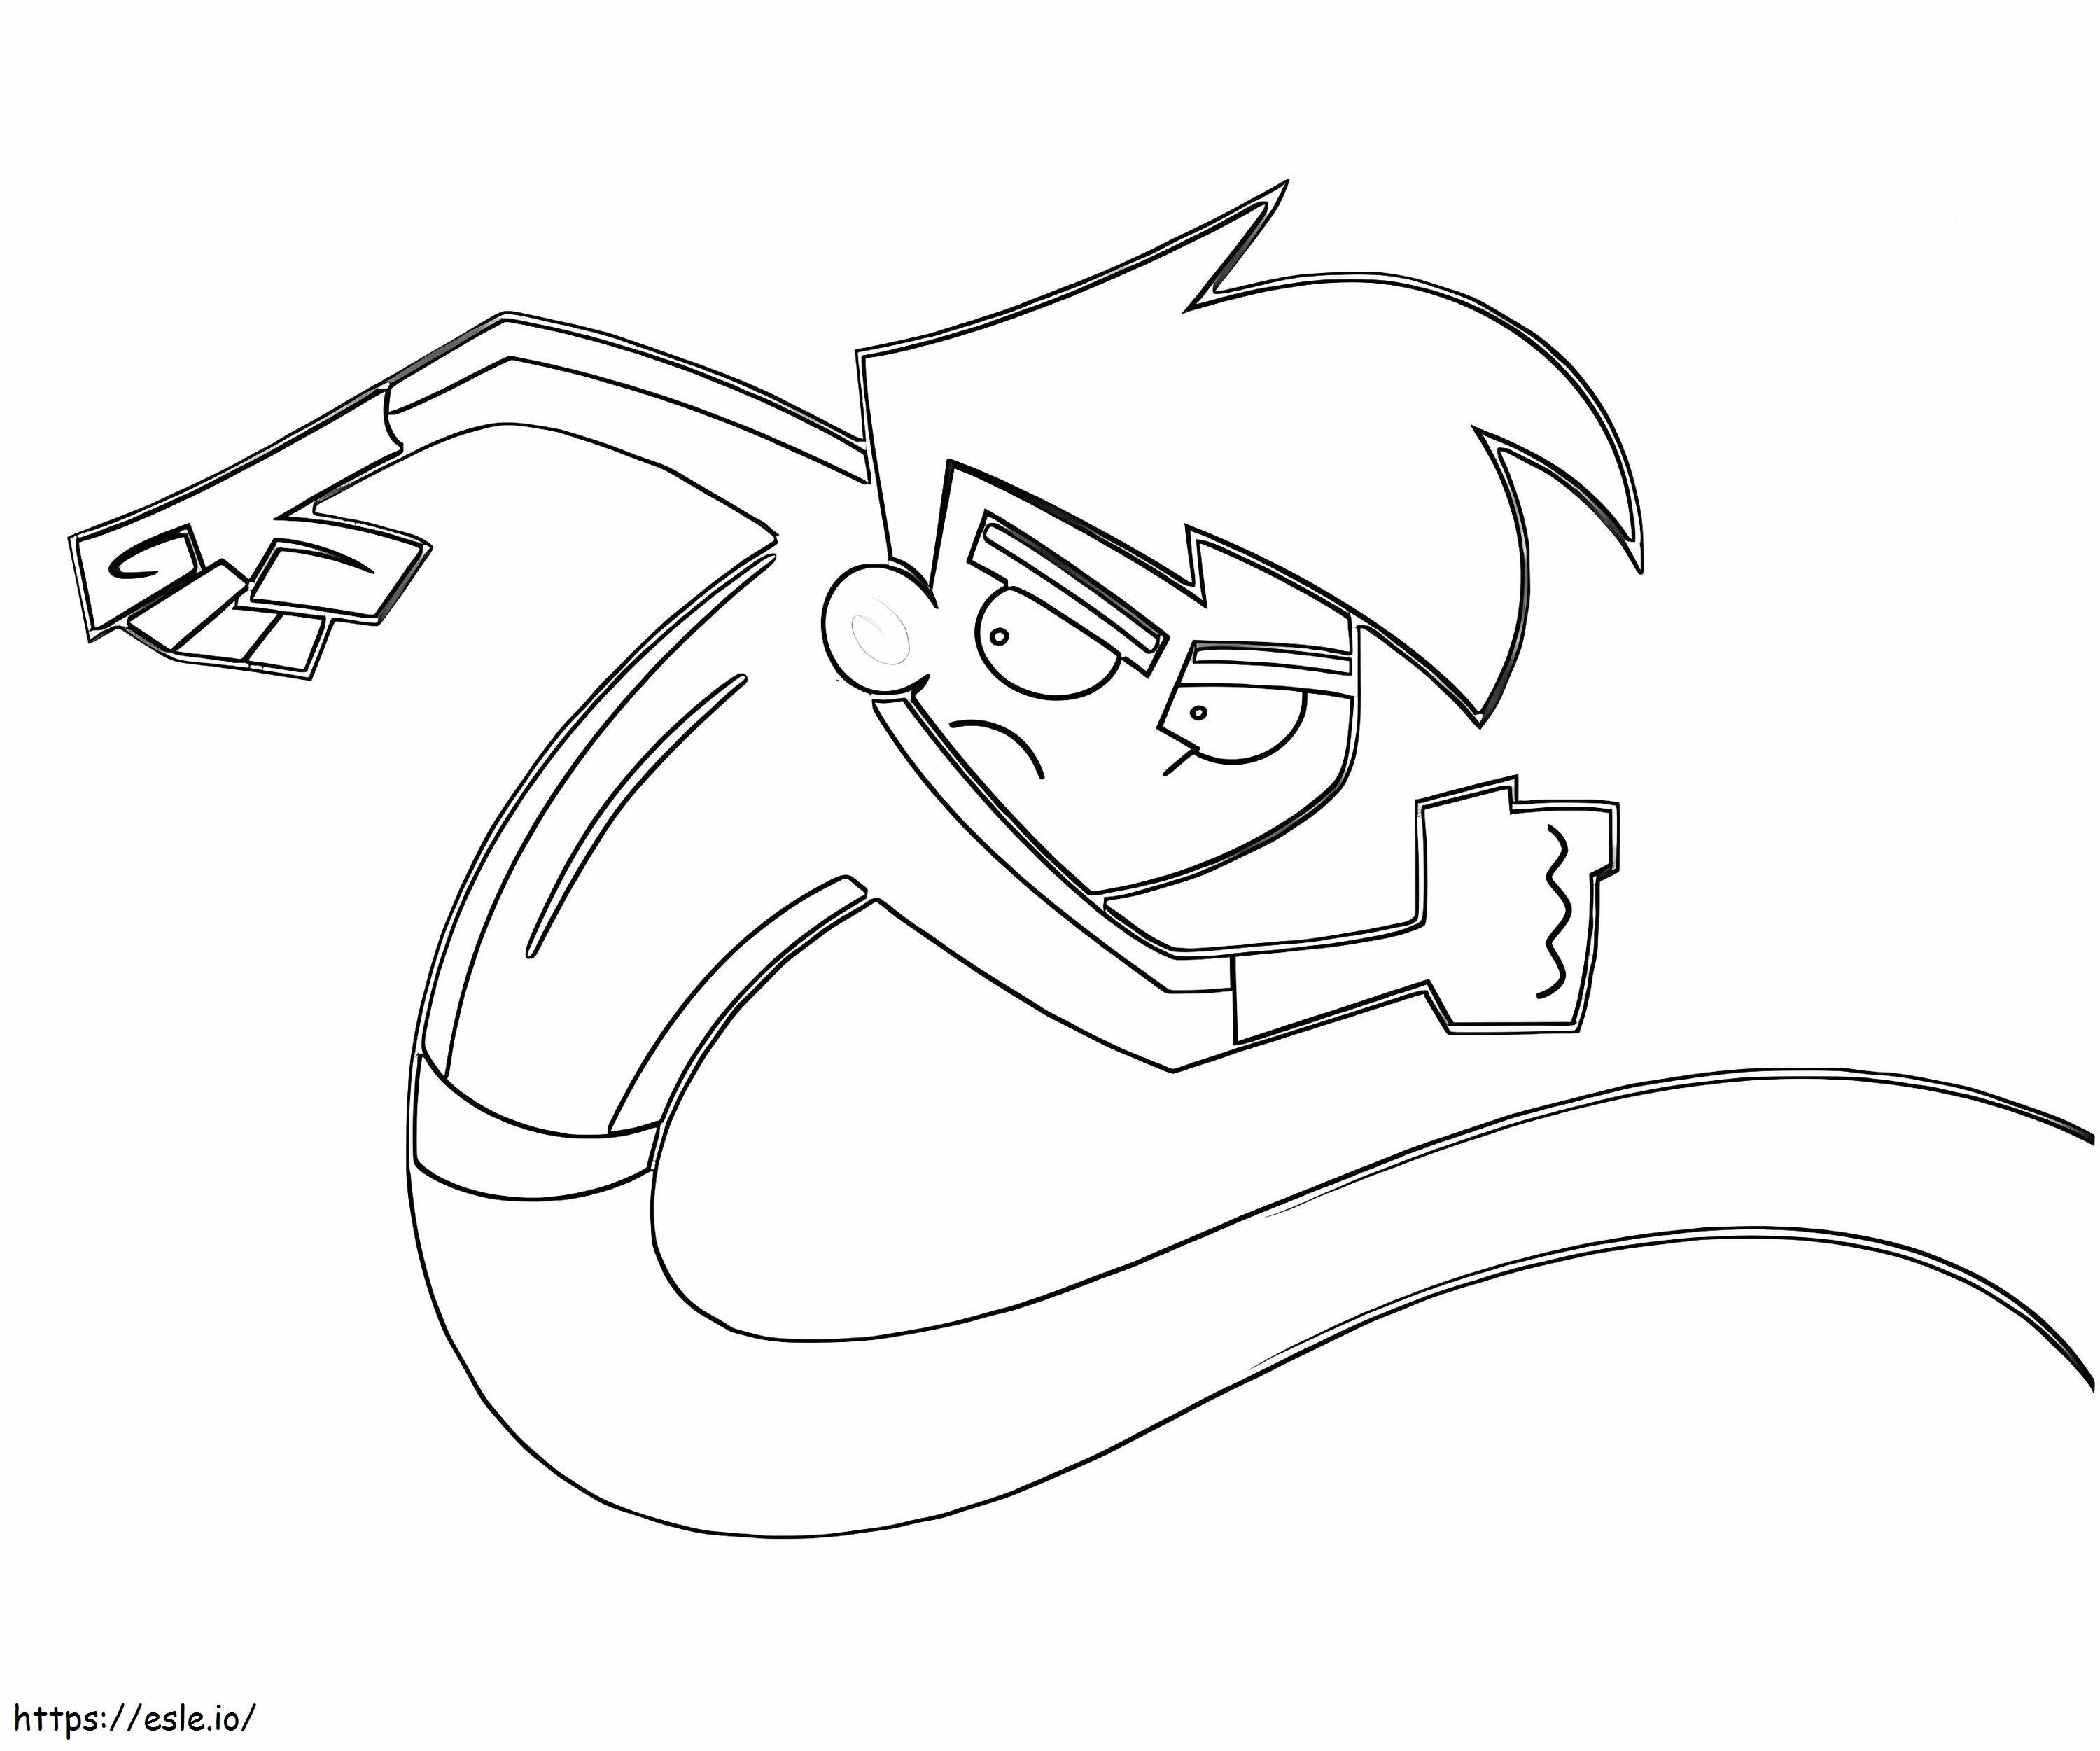 Awesome Danny Phantom coloring page